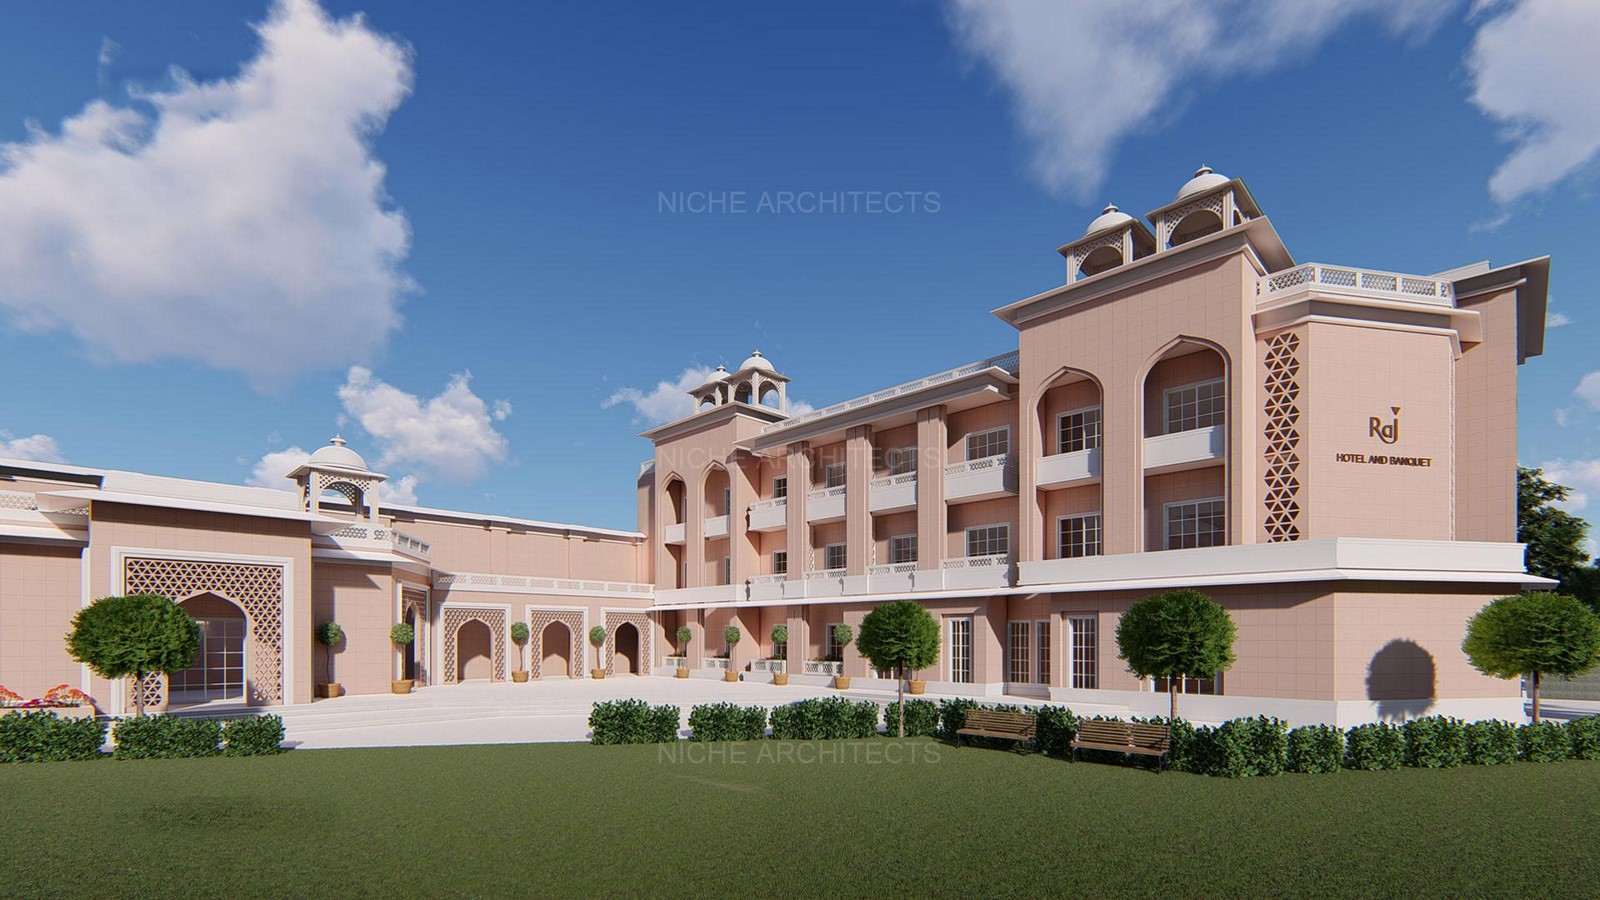 Raj Banquet Mirzapur_©http://www.nichearchitects.in/assets/images/projects/arch/a1.jpg